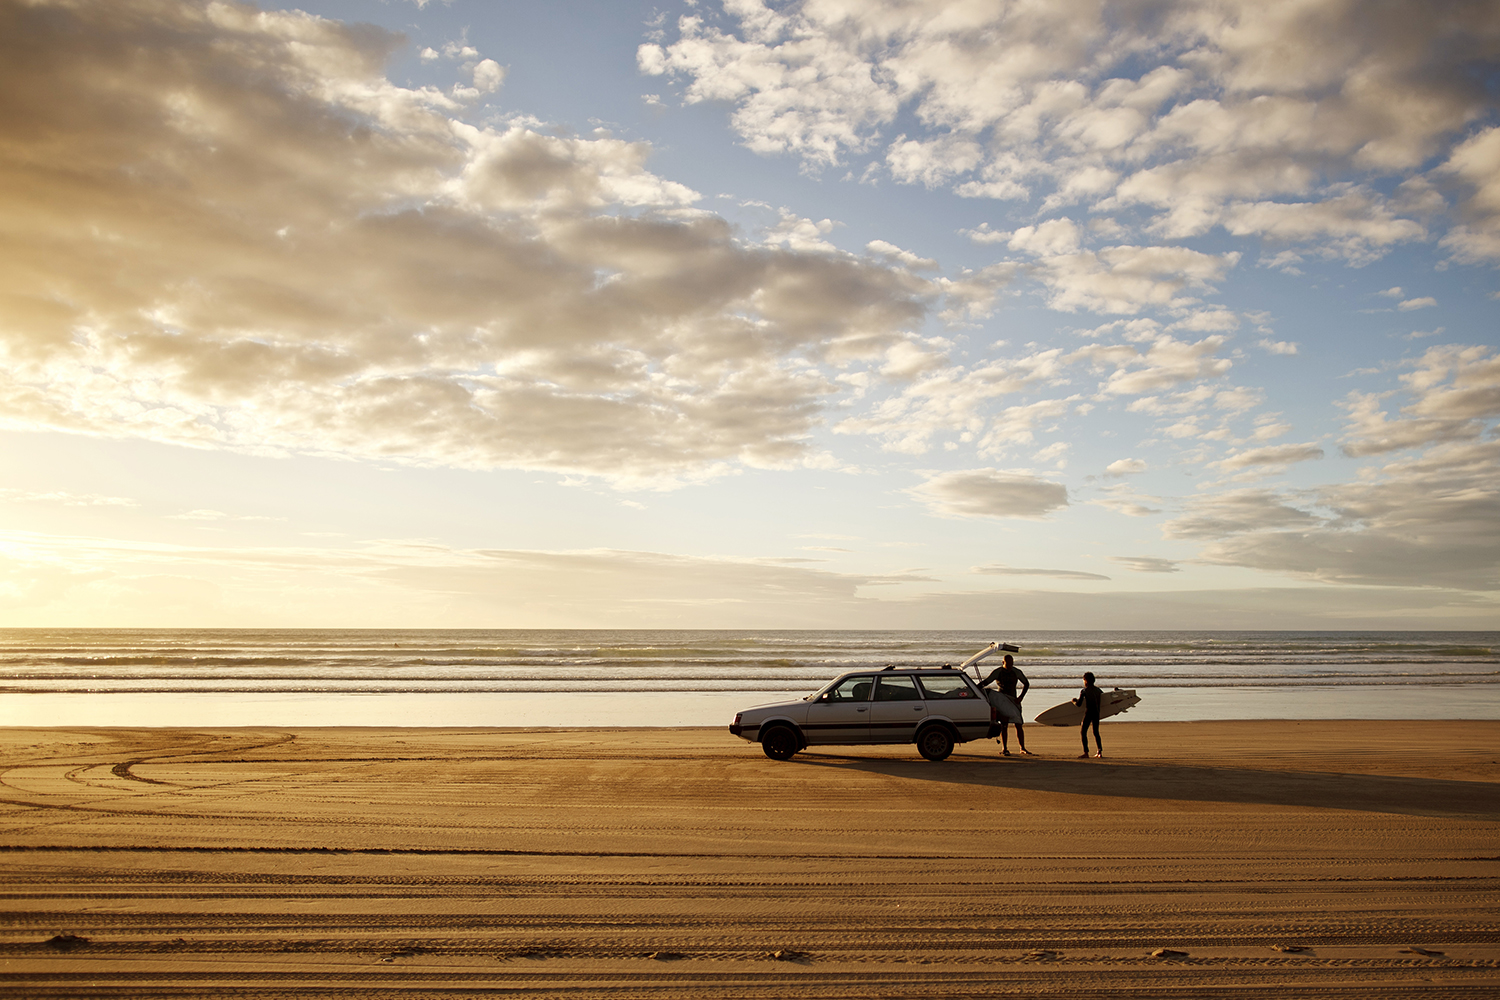 Golden sands and rolling surf make New Zealand's Ninety Mile Beach an irresistible spot to surf until sundown. Image by Amos Chapple / Lonely Planet Images / Getty Images